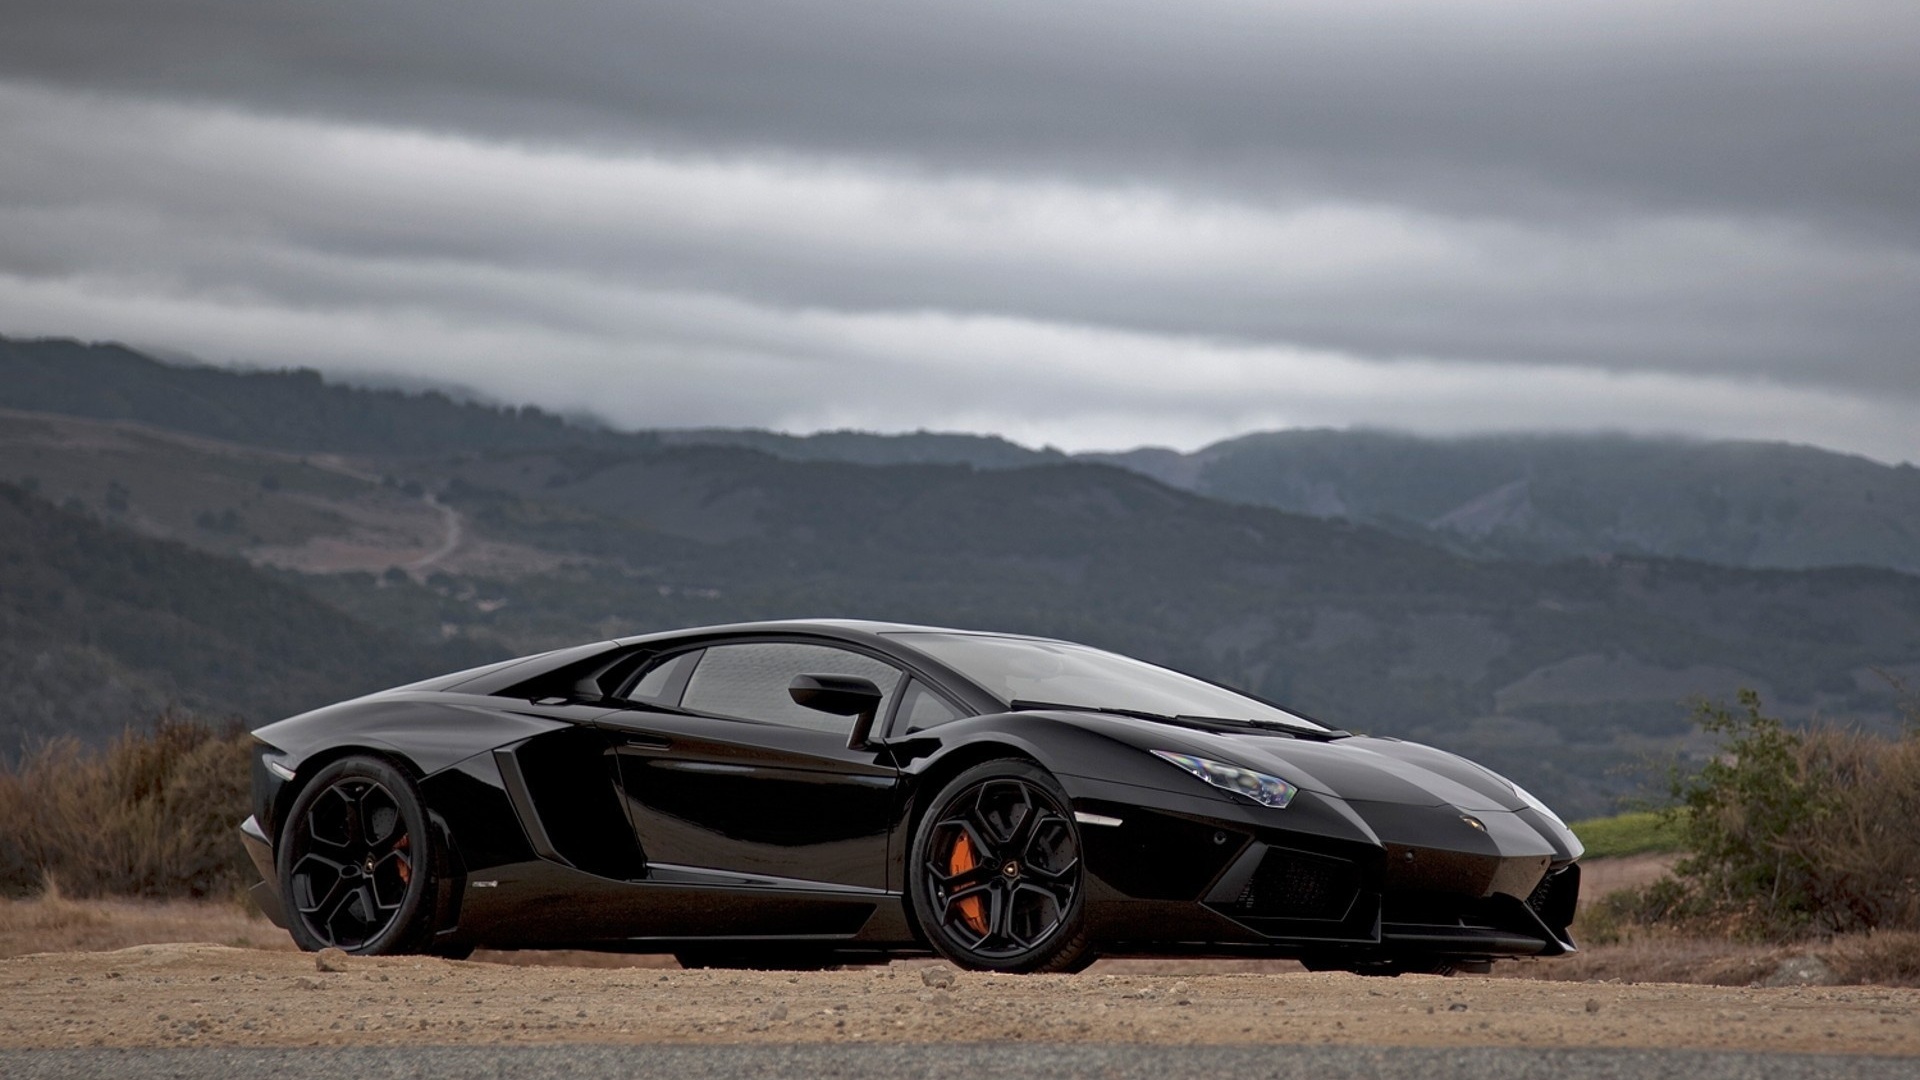 Best Lamborghini Wallpapers Image Hd Pictures   Autoshow Wallpapers